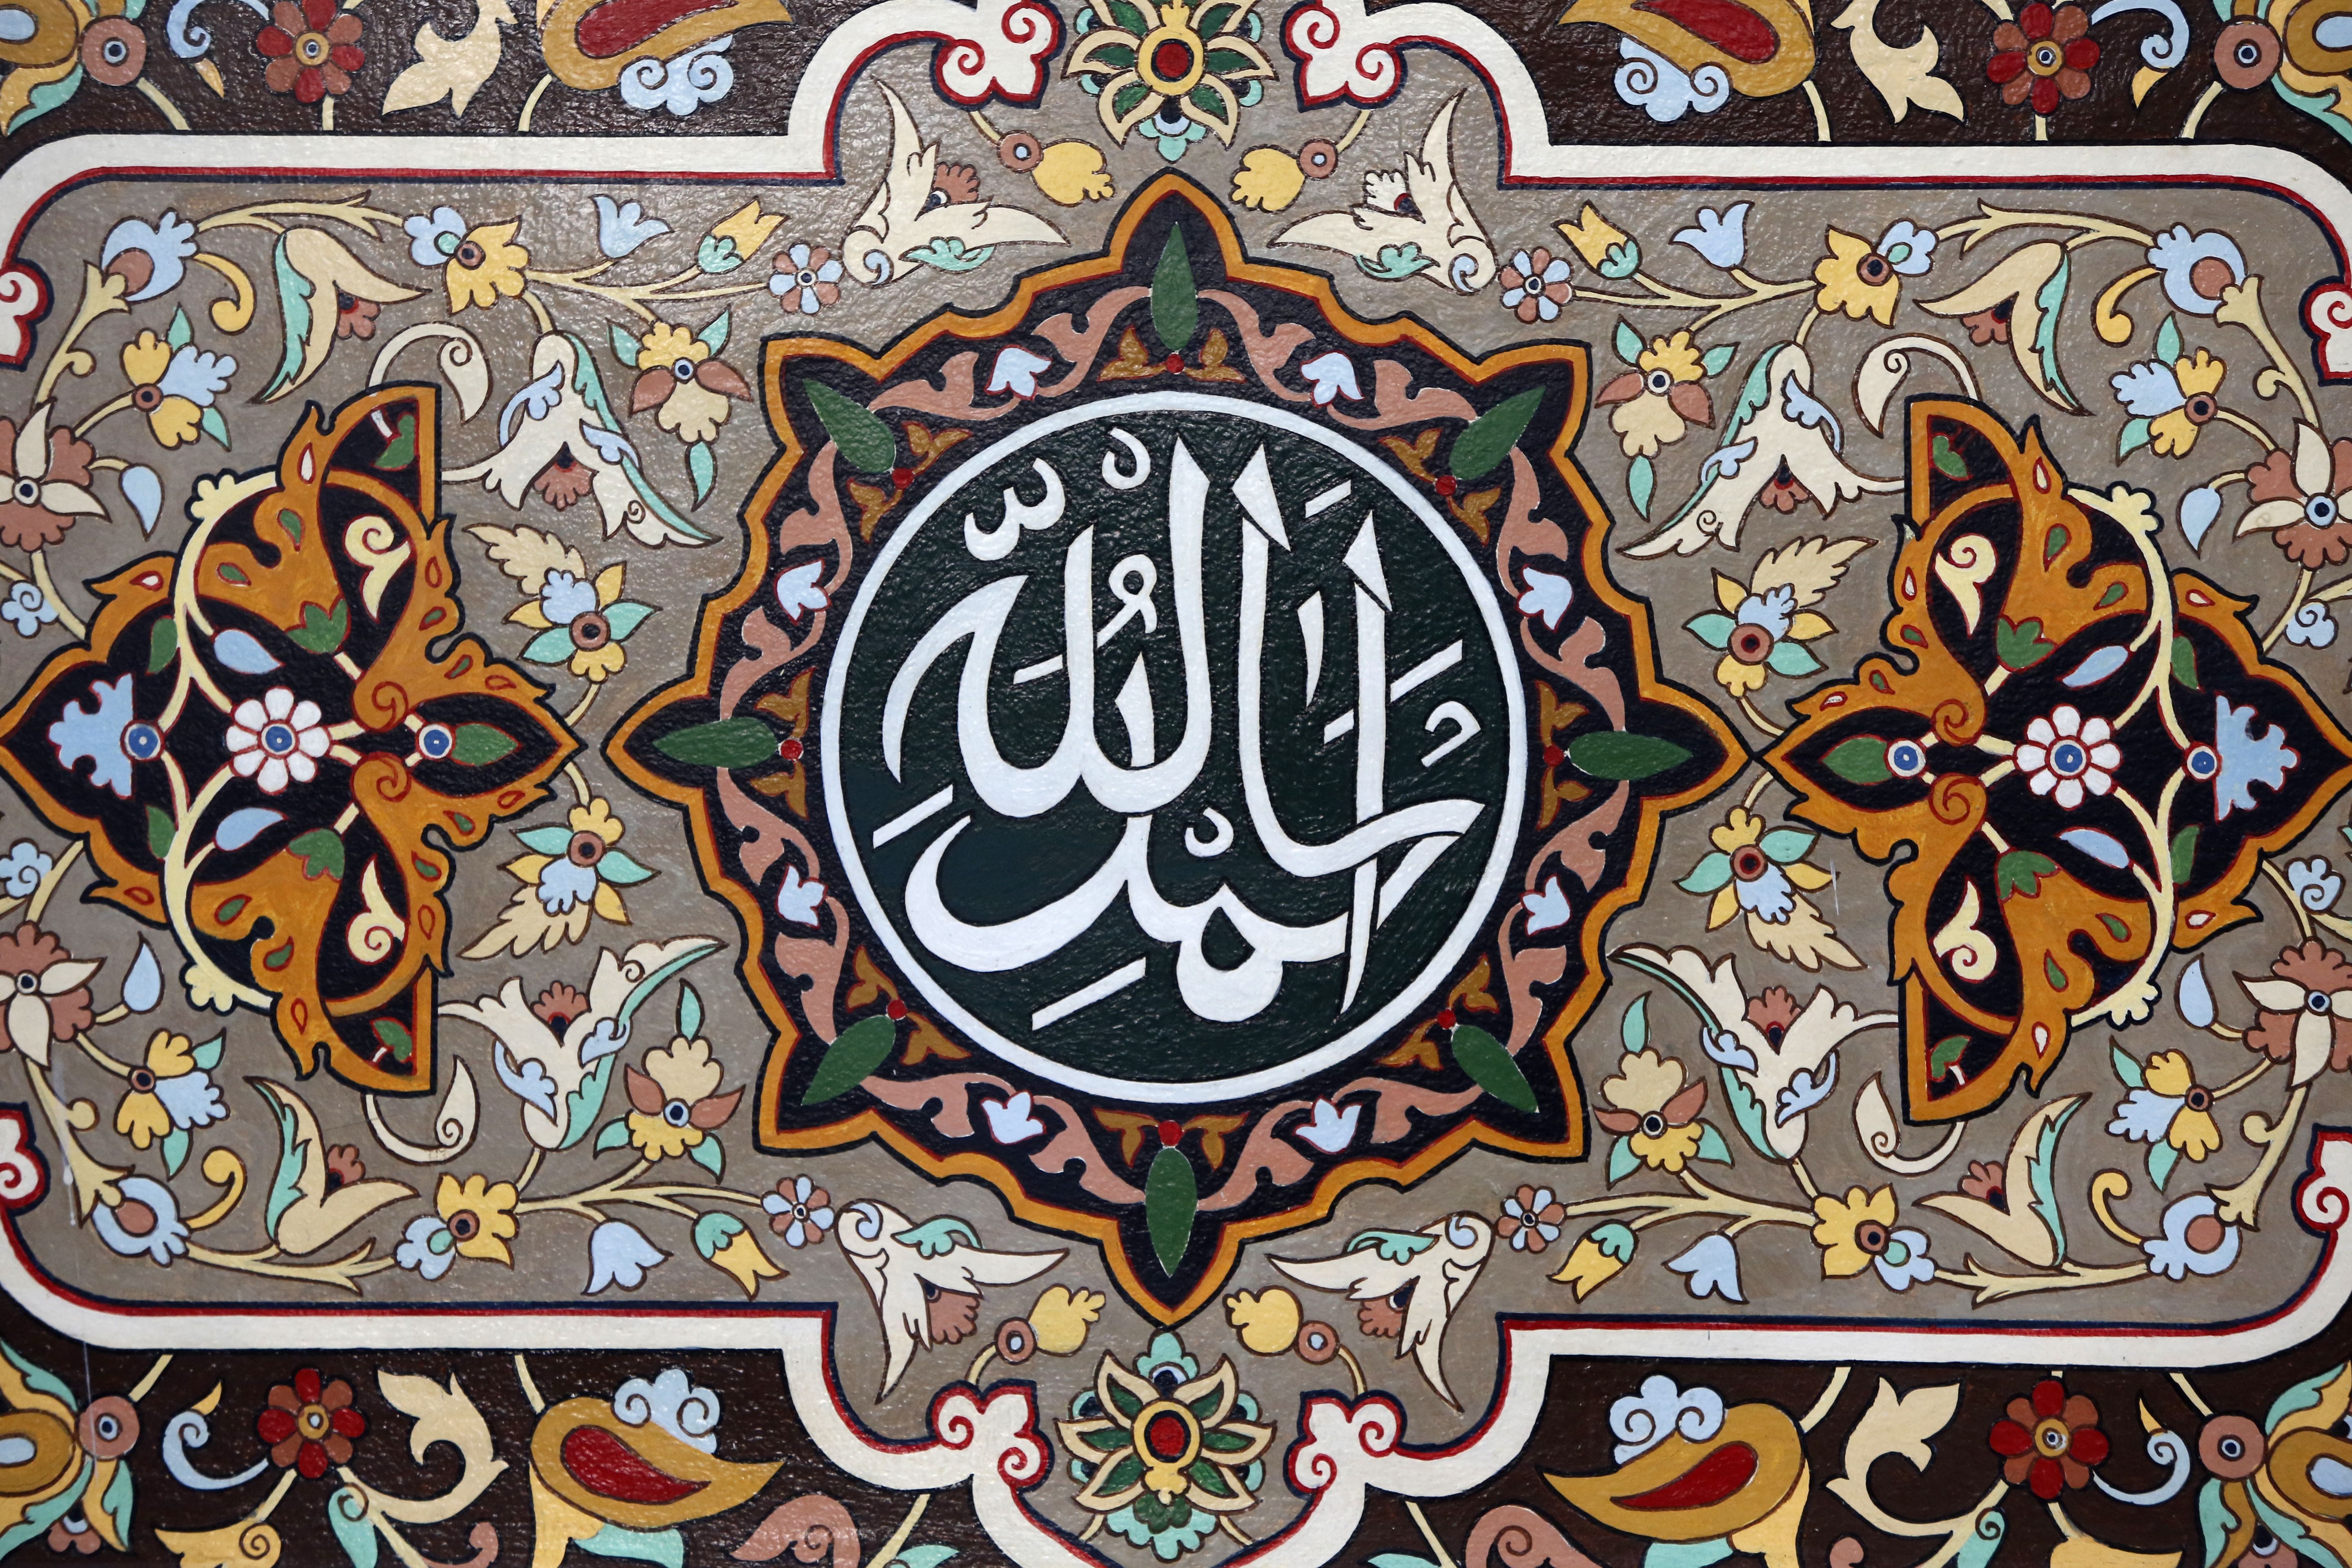 What Is the Meaning of the Islamic Phrase Alhamdulillah?